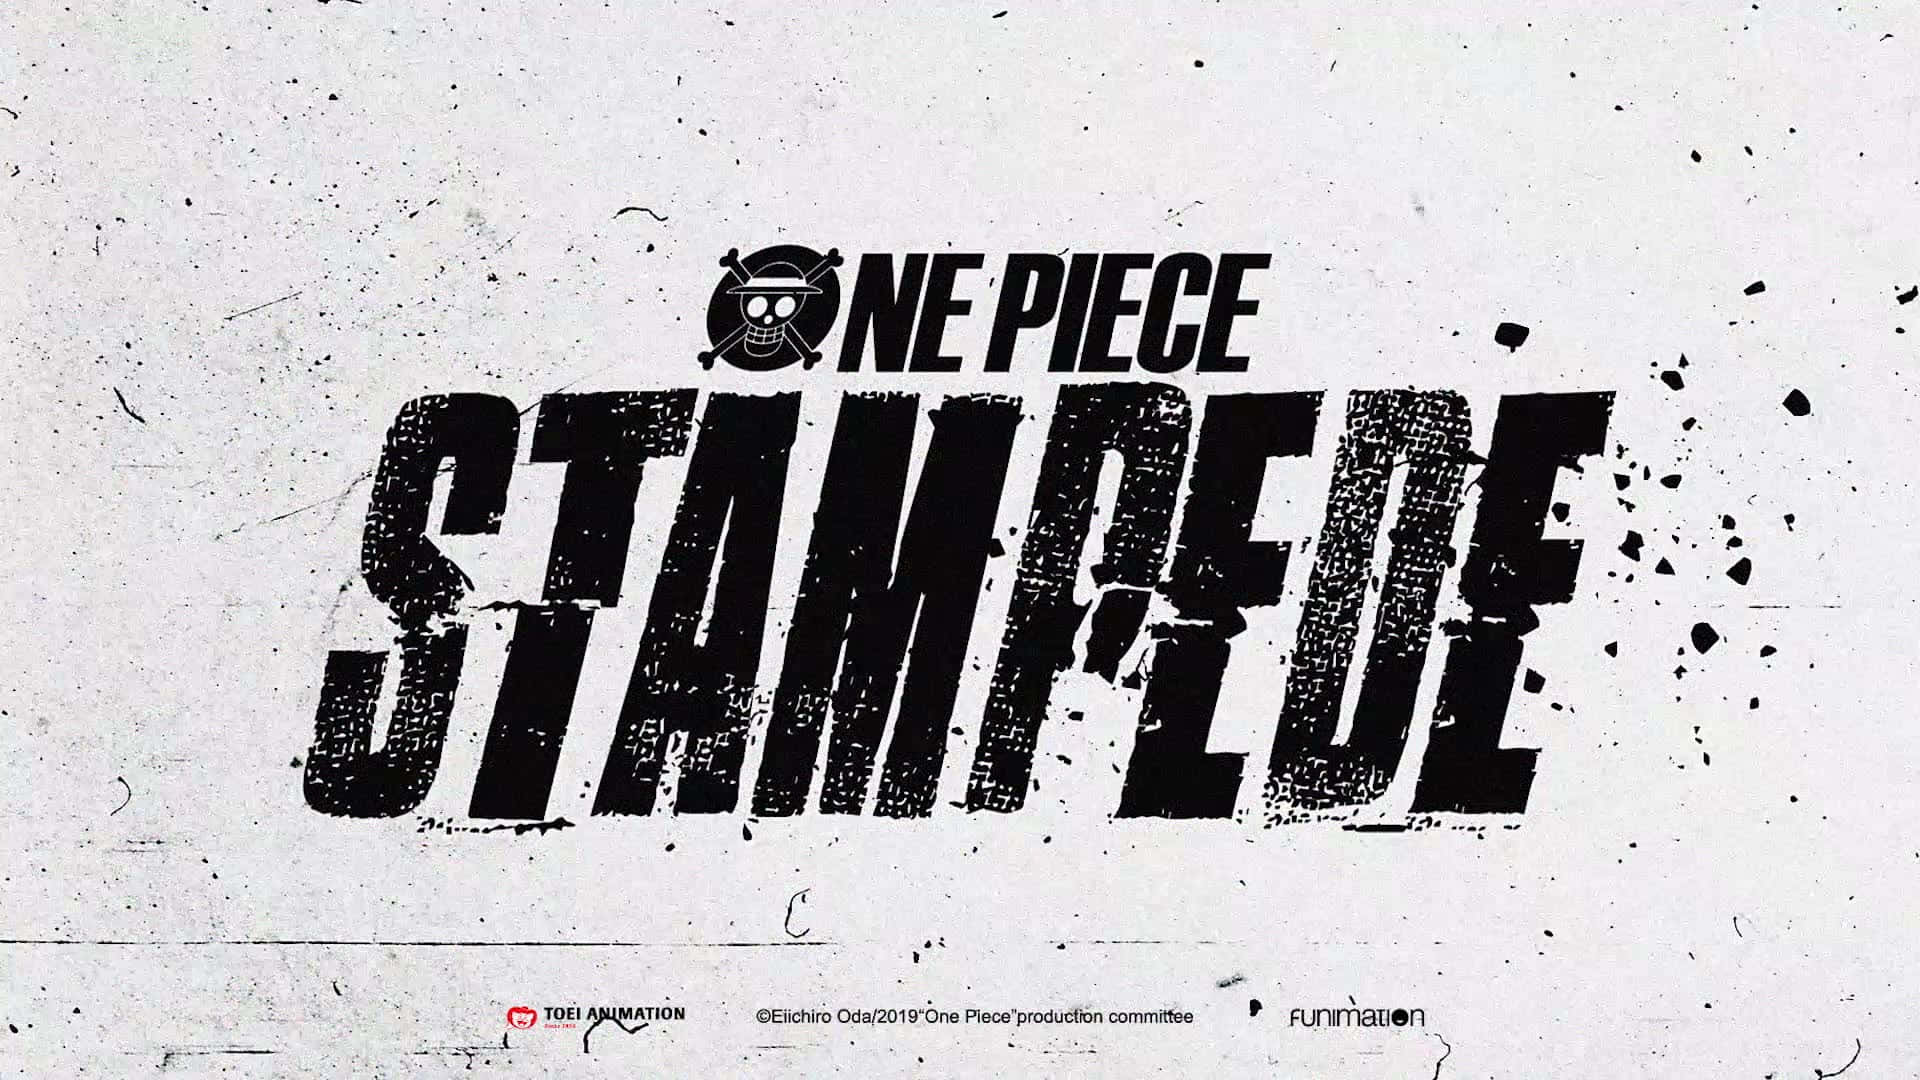 Get Ready for a High-octane Adventure with One Piece Stampede Wallpaper